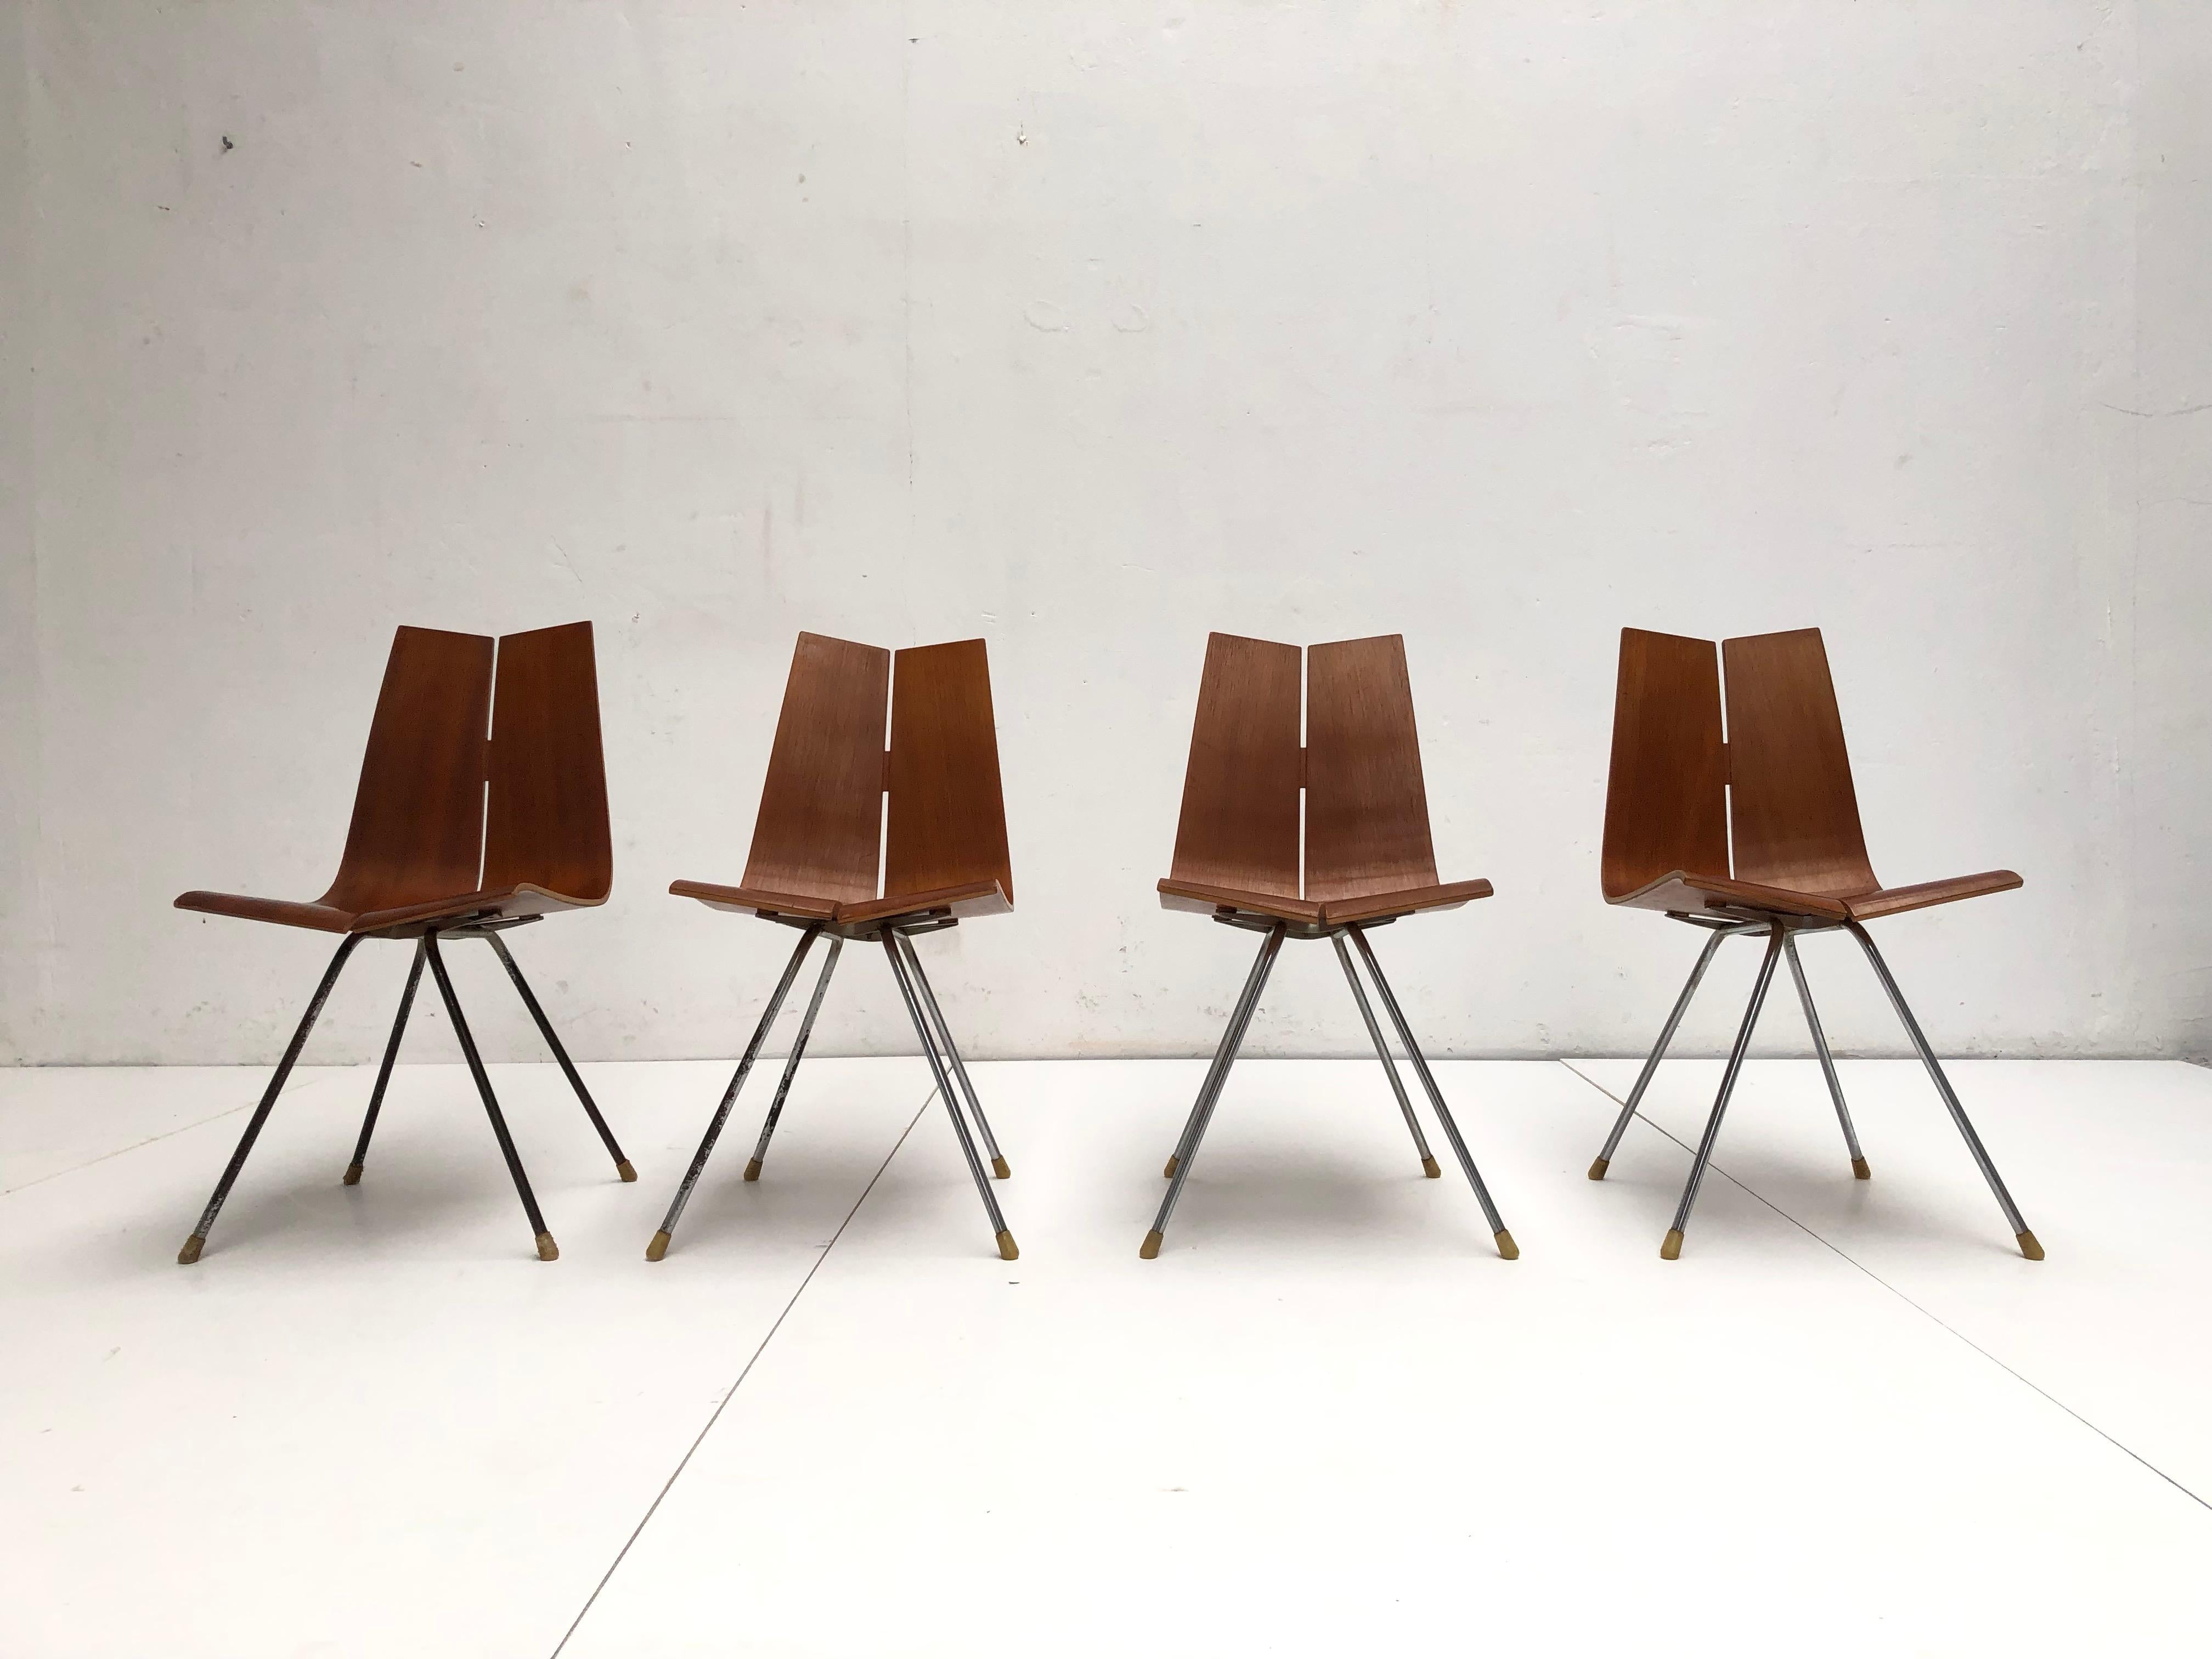 Rare set of 4 original early production GA dining chairs by Swiss designer Hans bellmann produced by Horgen Glarus late 1950's 

Beautiful curved Teak plywood seating on a chromed metal base

Fixed just with 2 special engineered nuts & bolds the